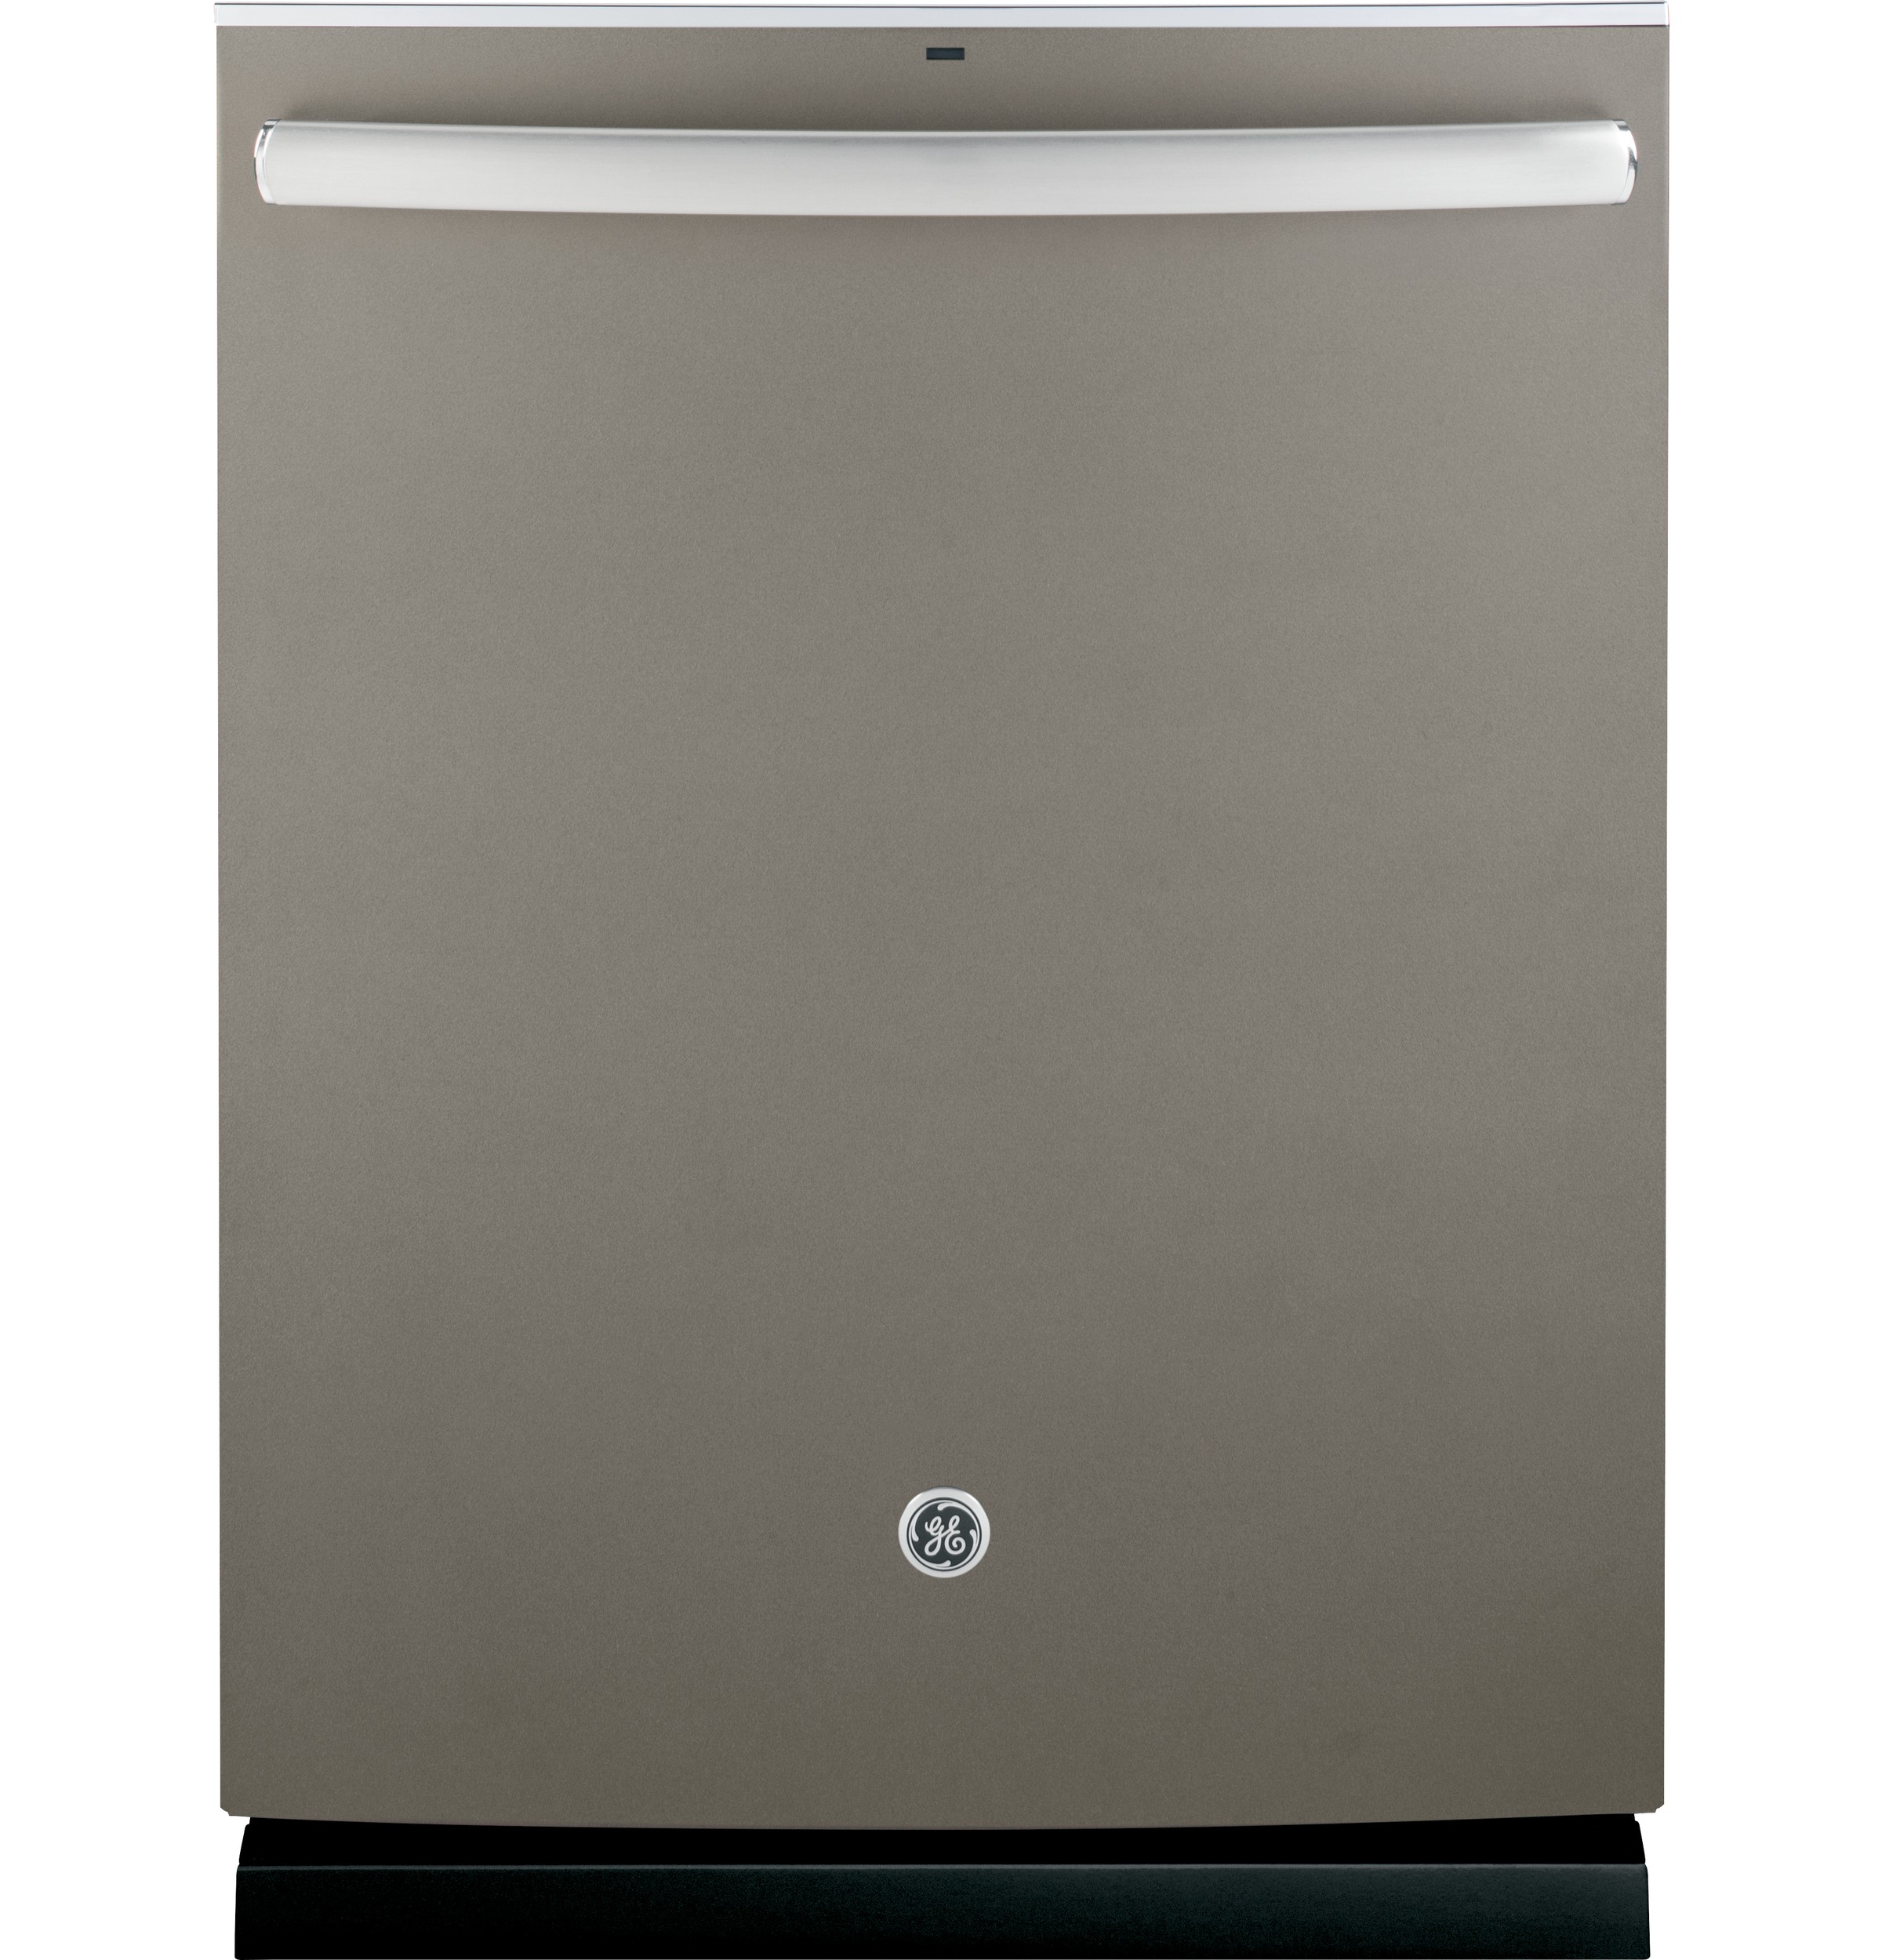 GE® Stainless Steel Interior Dishwasher with Hidden Controls